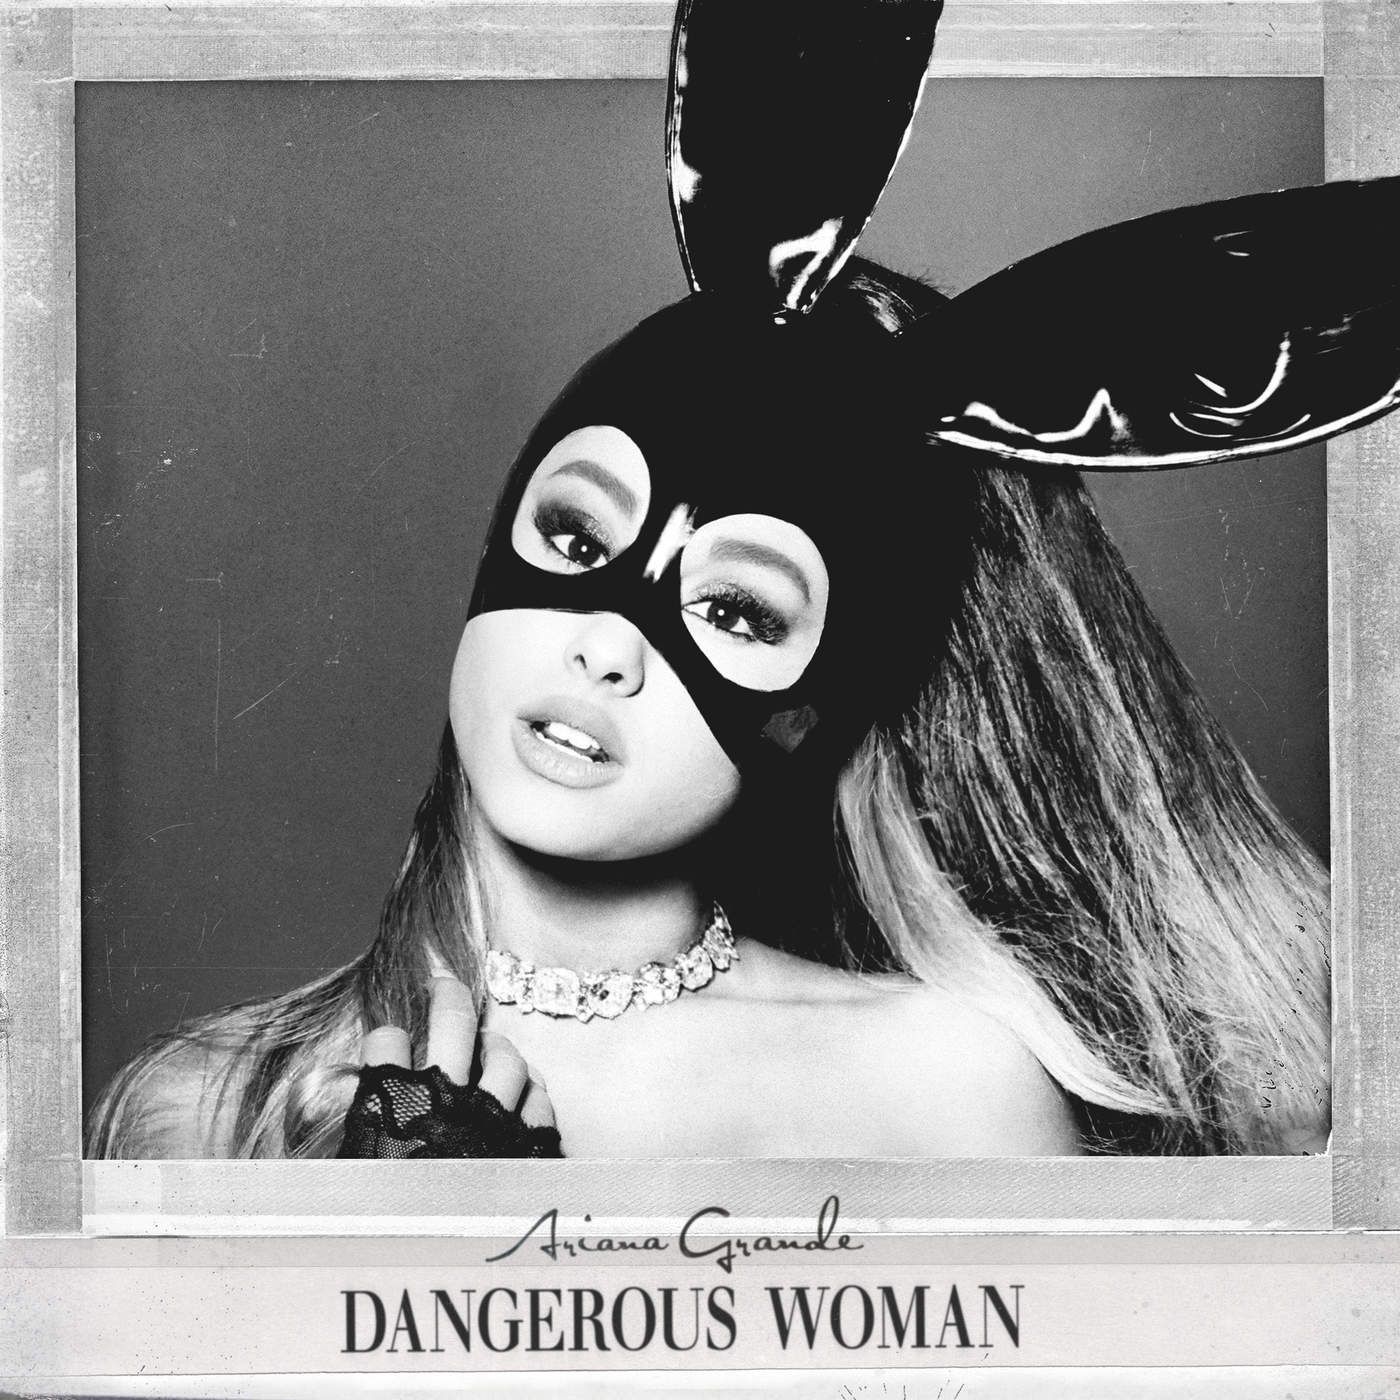 Ariana Grande S New Album Dangerous Woman Our Track By Track First Listen Review